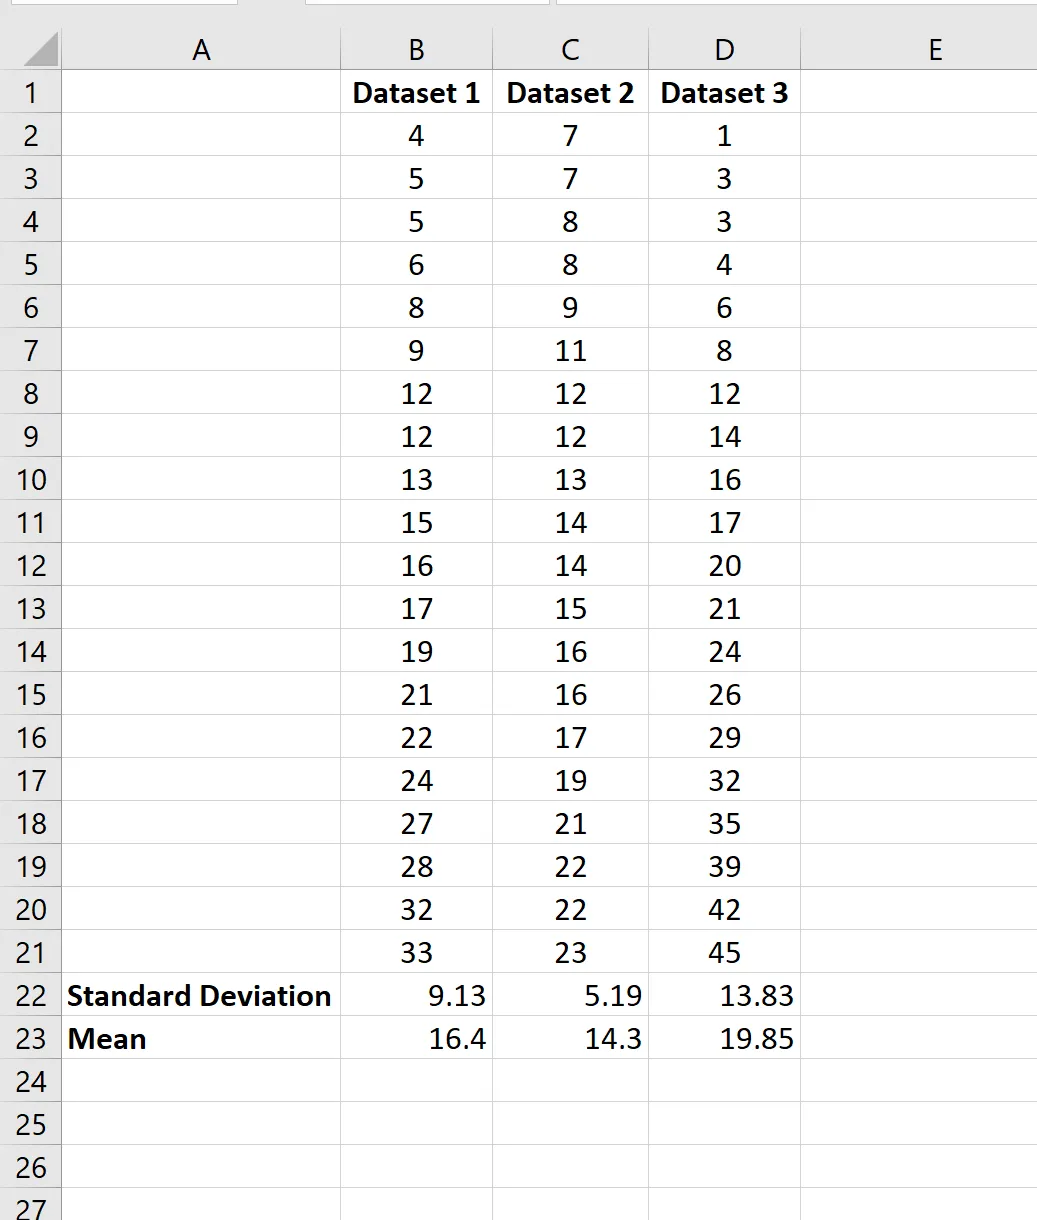 Mean and standard deviation of multiple datasets in Excel